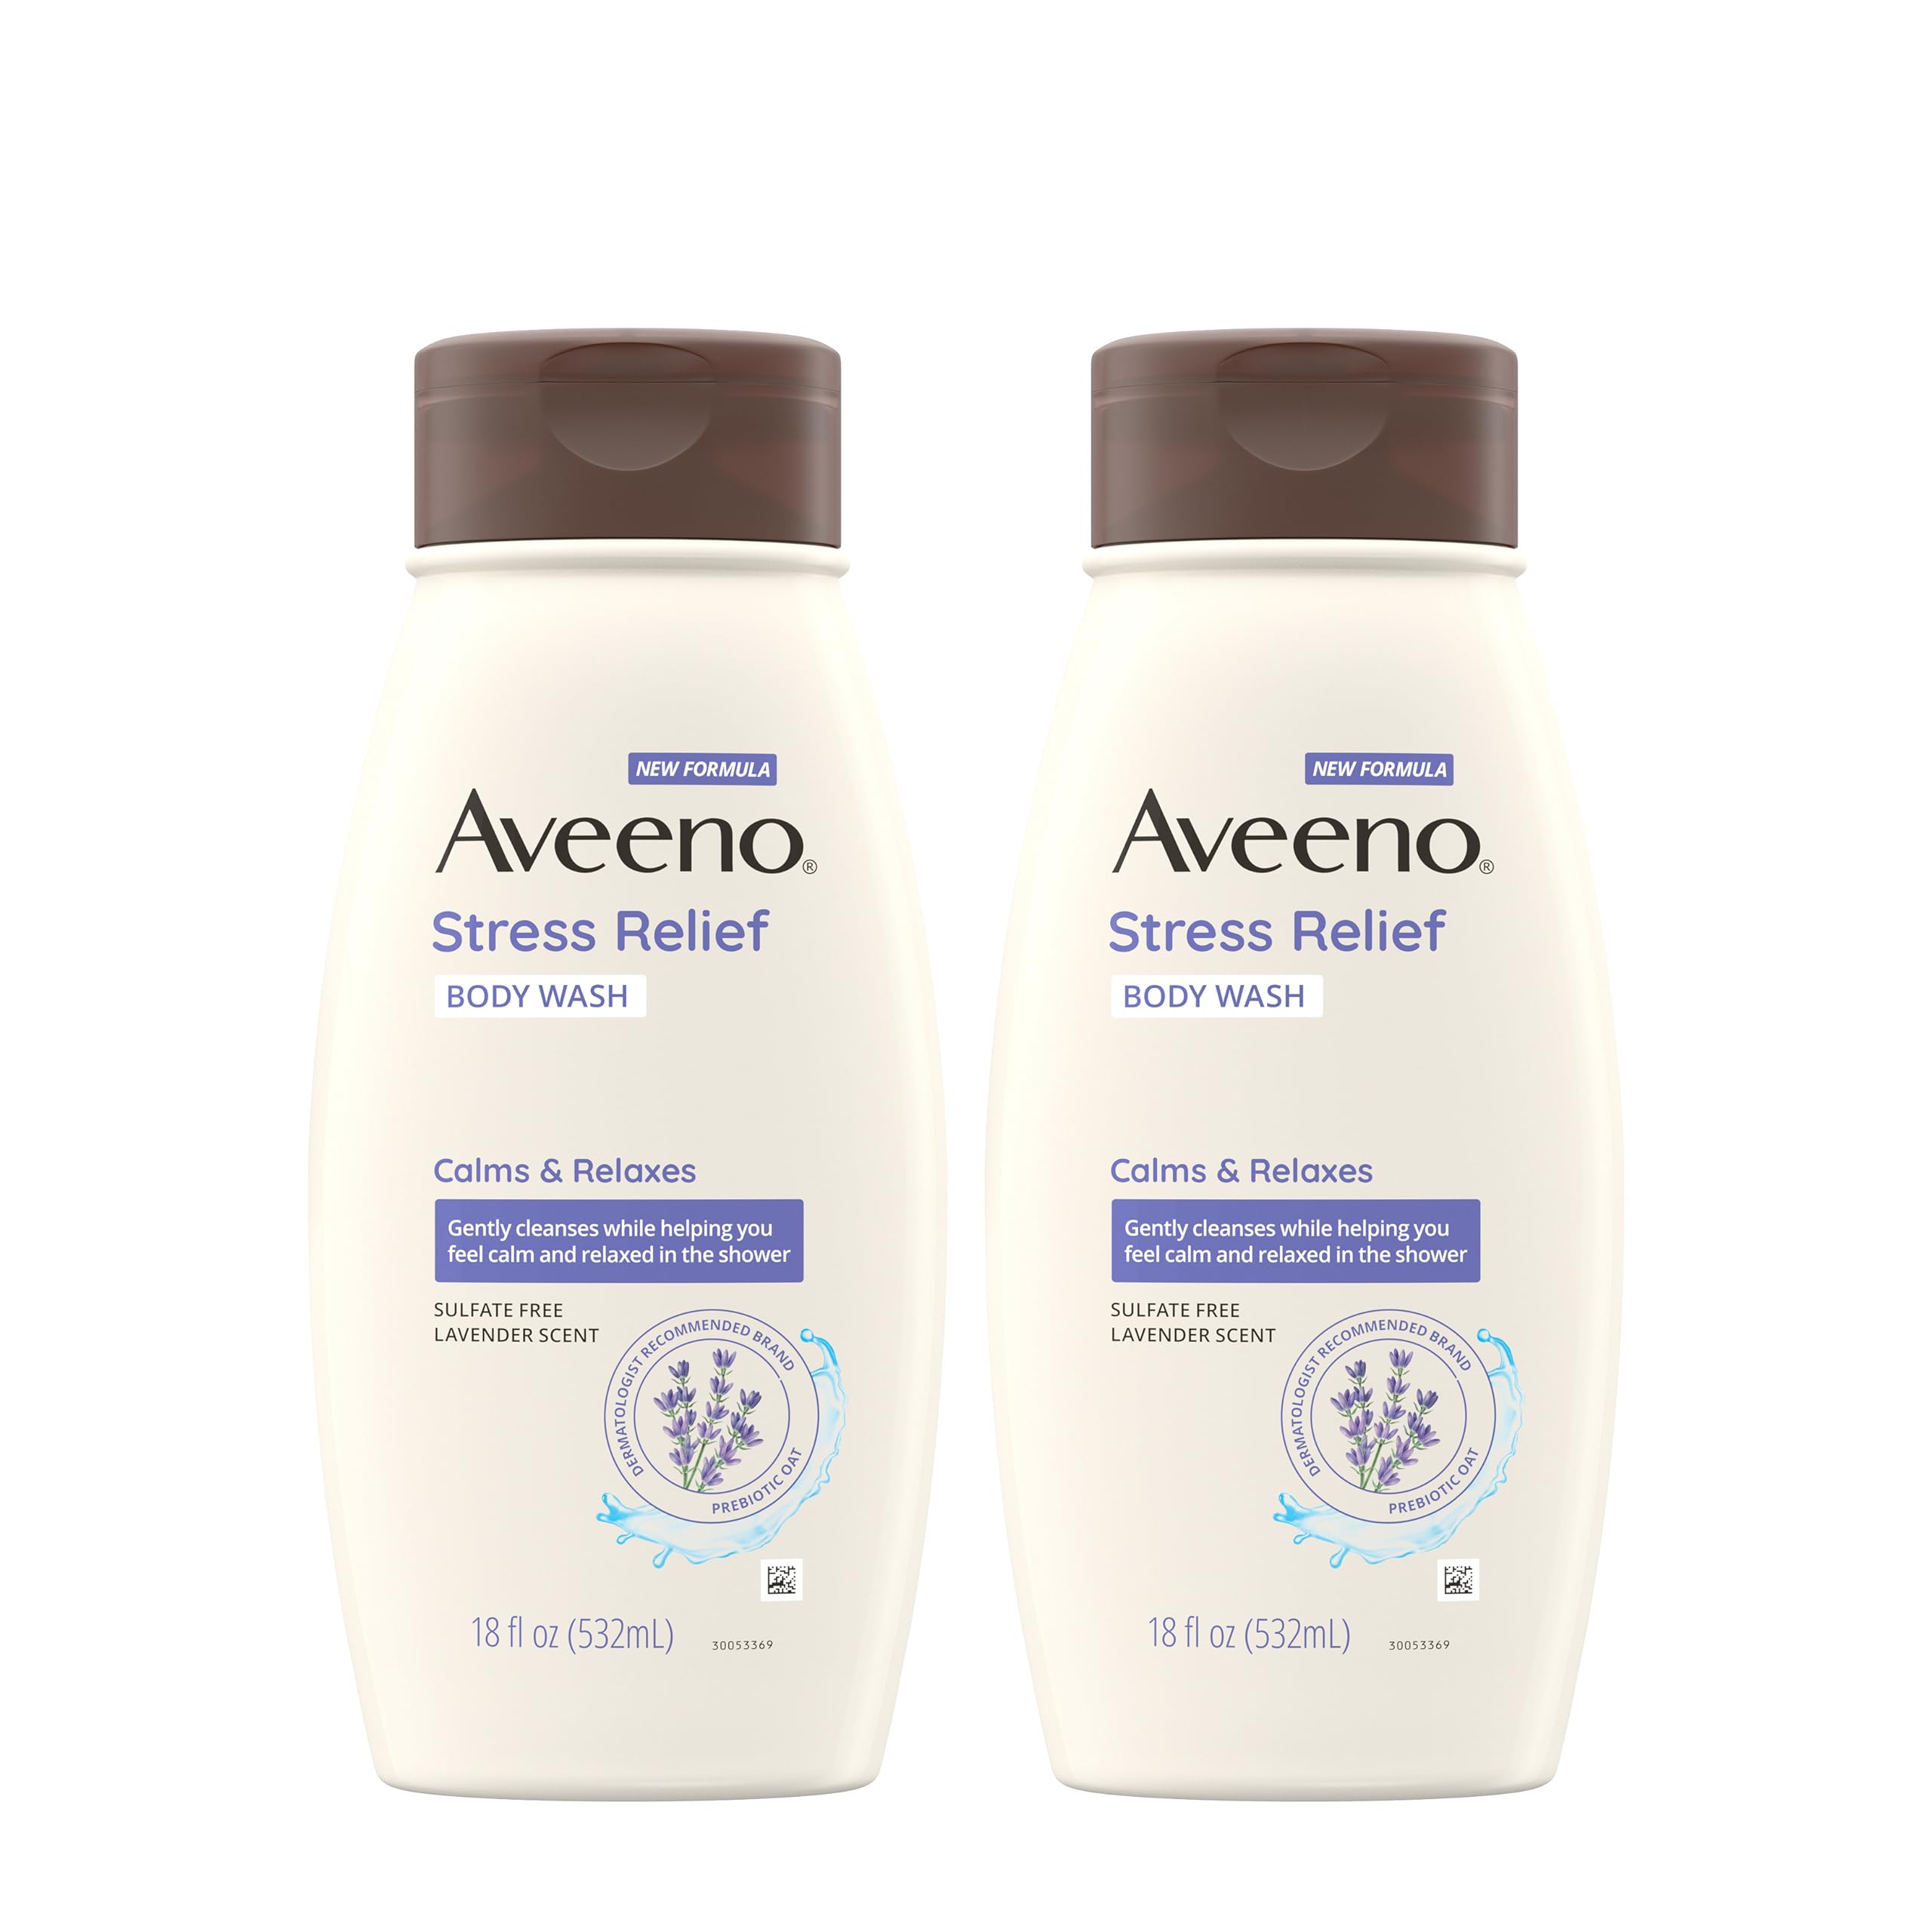 Aveeno Stress Relief Body Wash with Soothing Oat & Lavender Scent for Sensitive Skin, Moisturizing Shower Wash Gently Cleanses & Helps You Feel Calm, Sulfate-Free, Twin Pack, 2 x 18 fl. oz